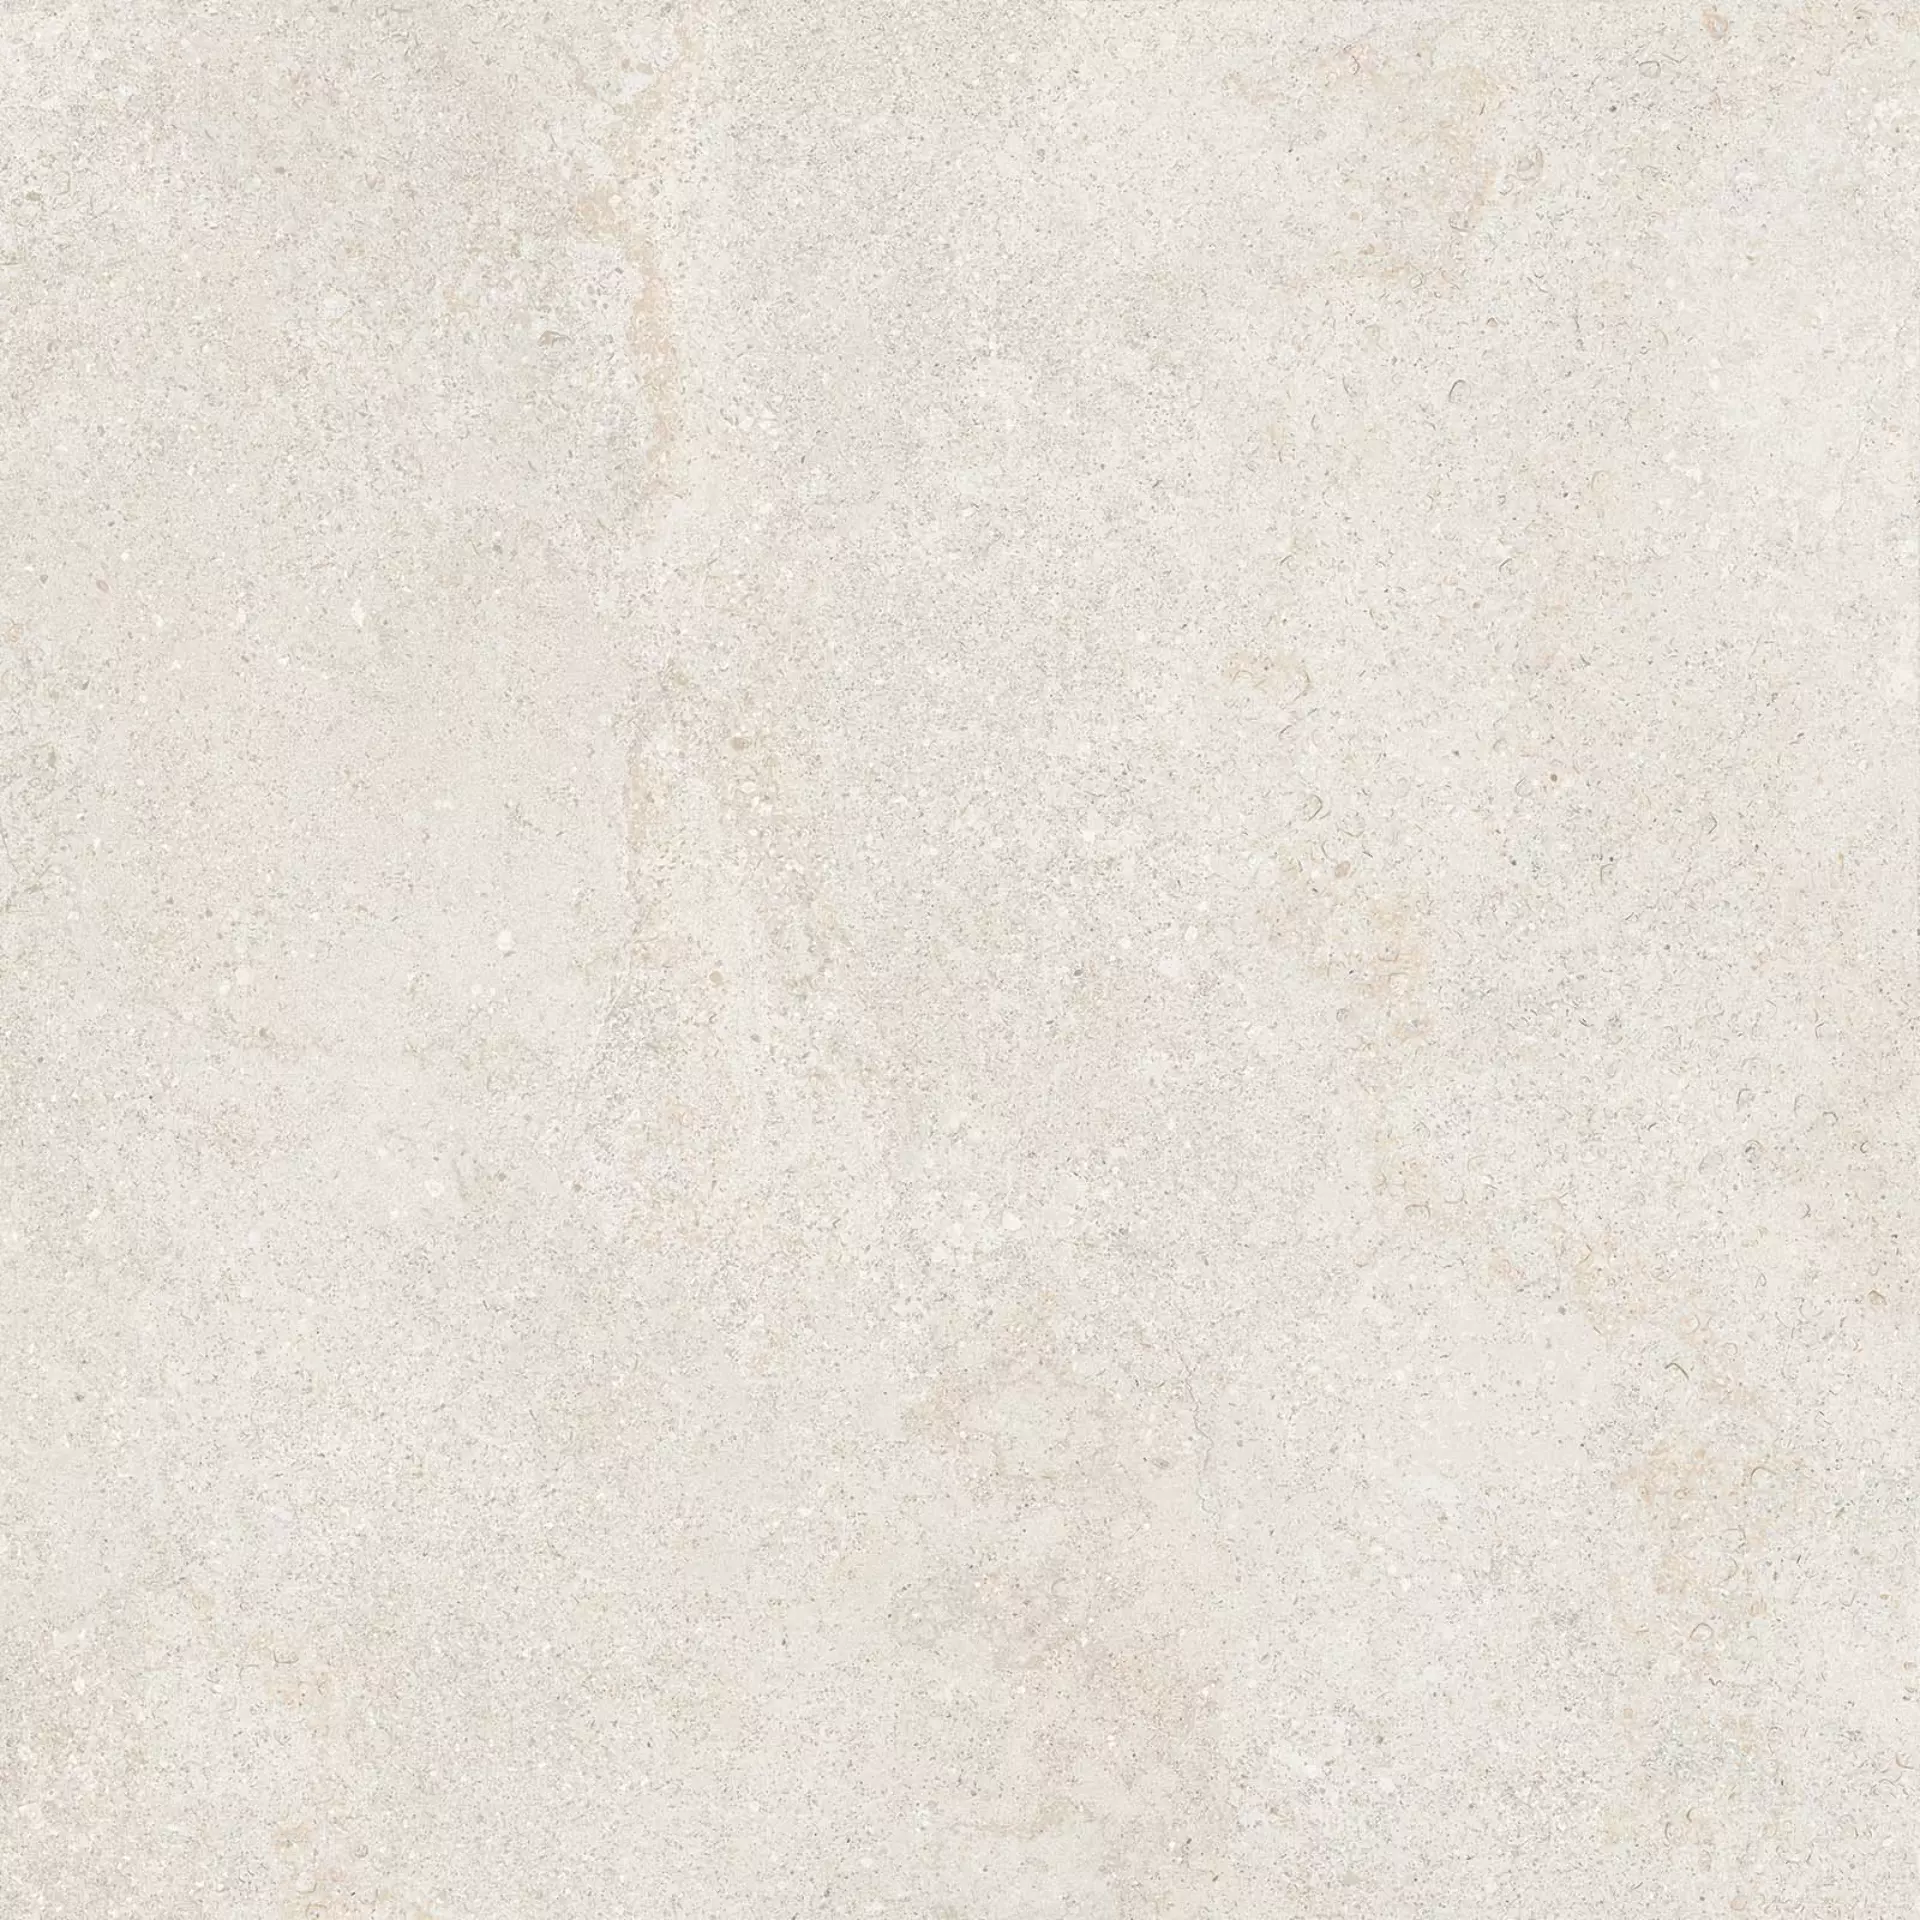 Keope Brystone White Strutturato 44593557 80x80cm rectified 20mm